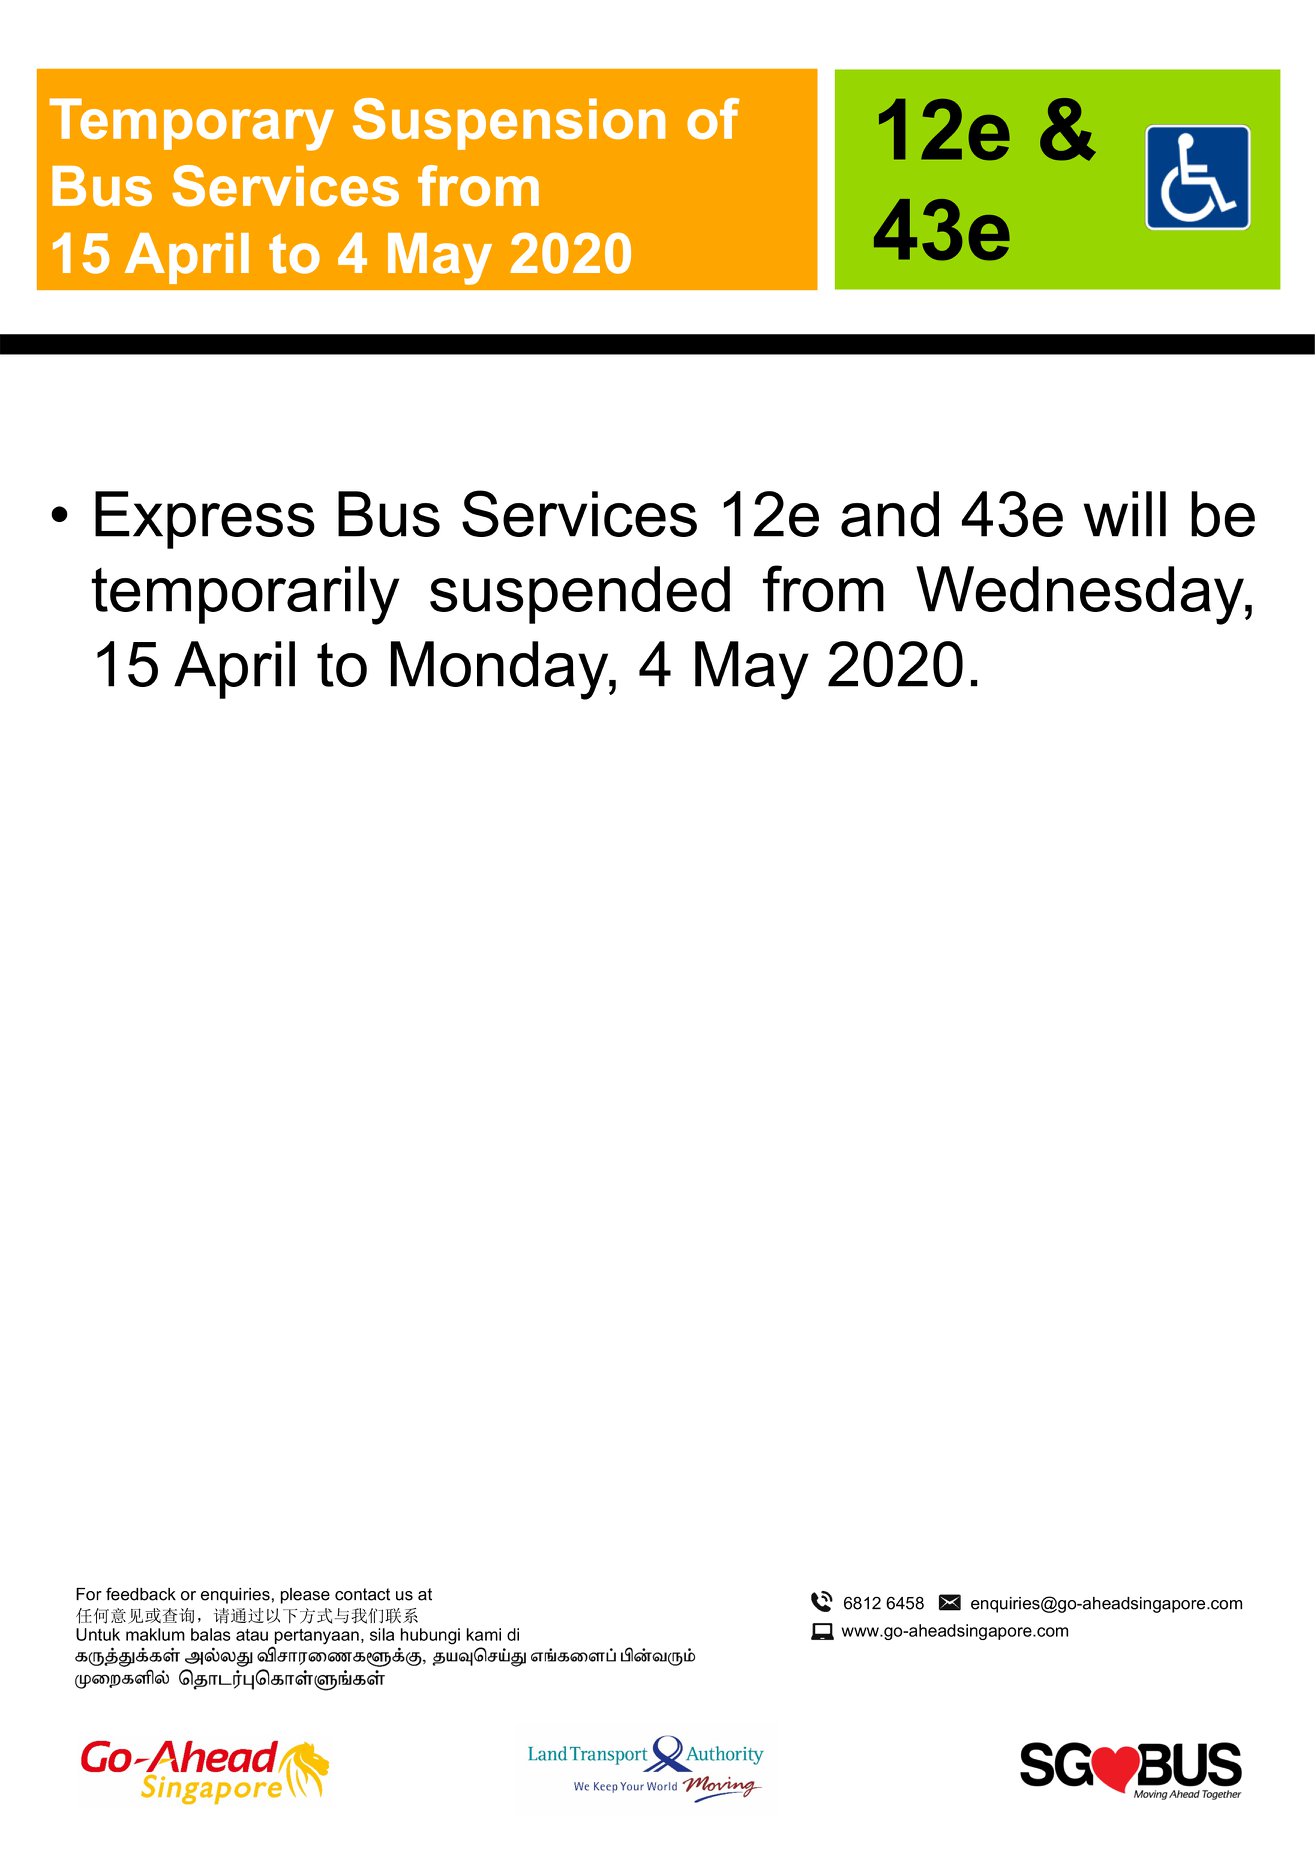 Official announcement from Go-Ahead Singapore on temporary bus service suspension during COVID-19 Circuit Breaker measures 15 April 2020.